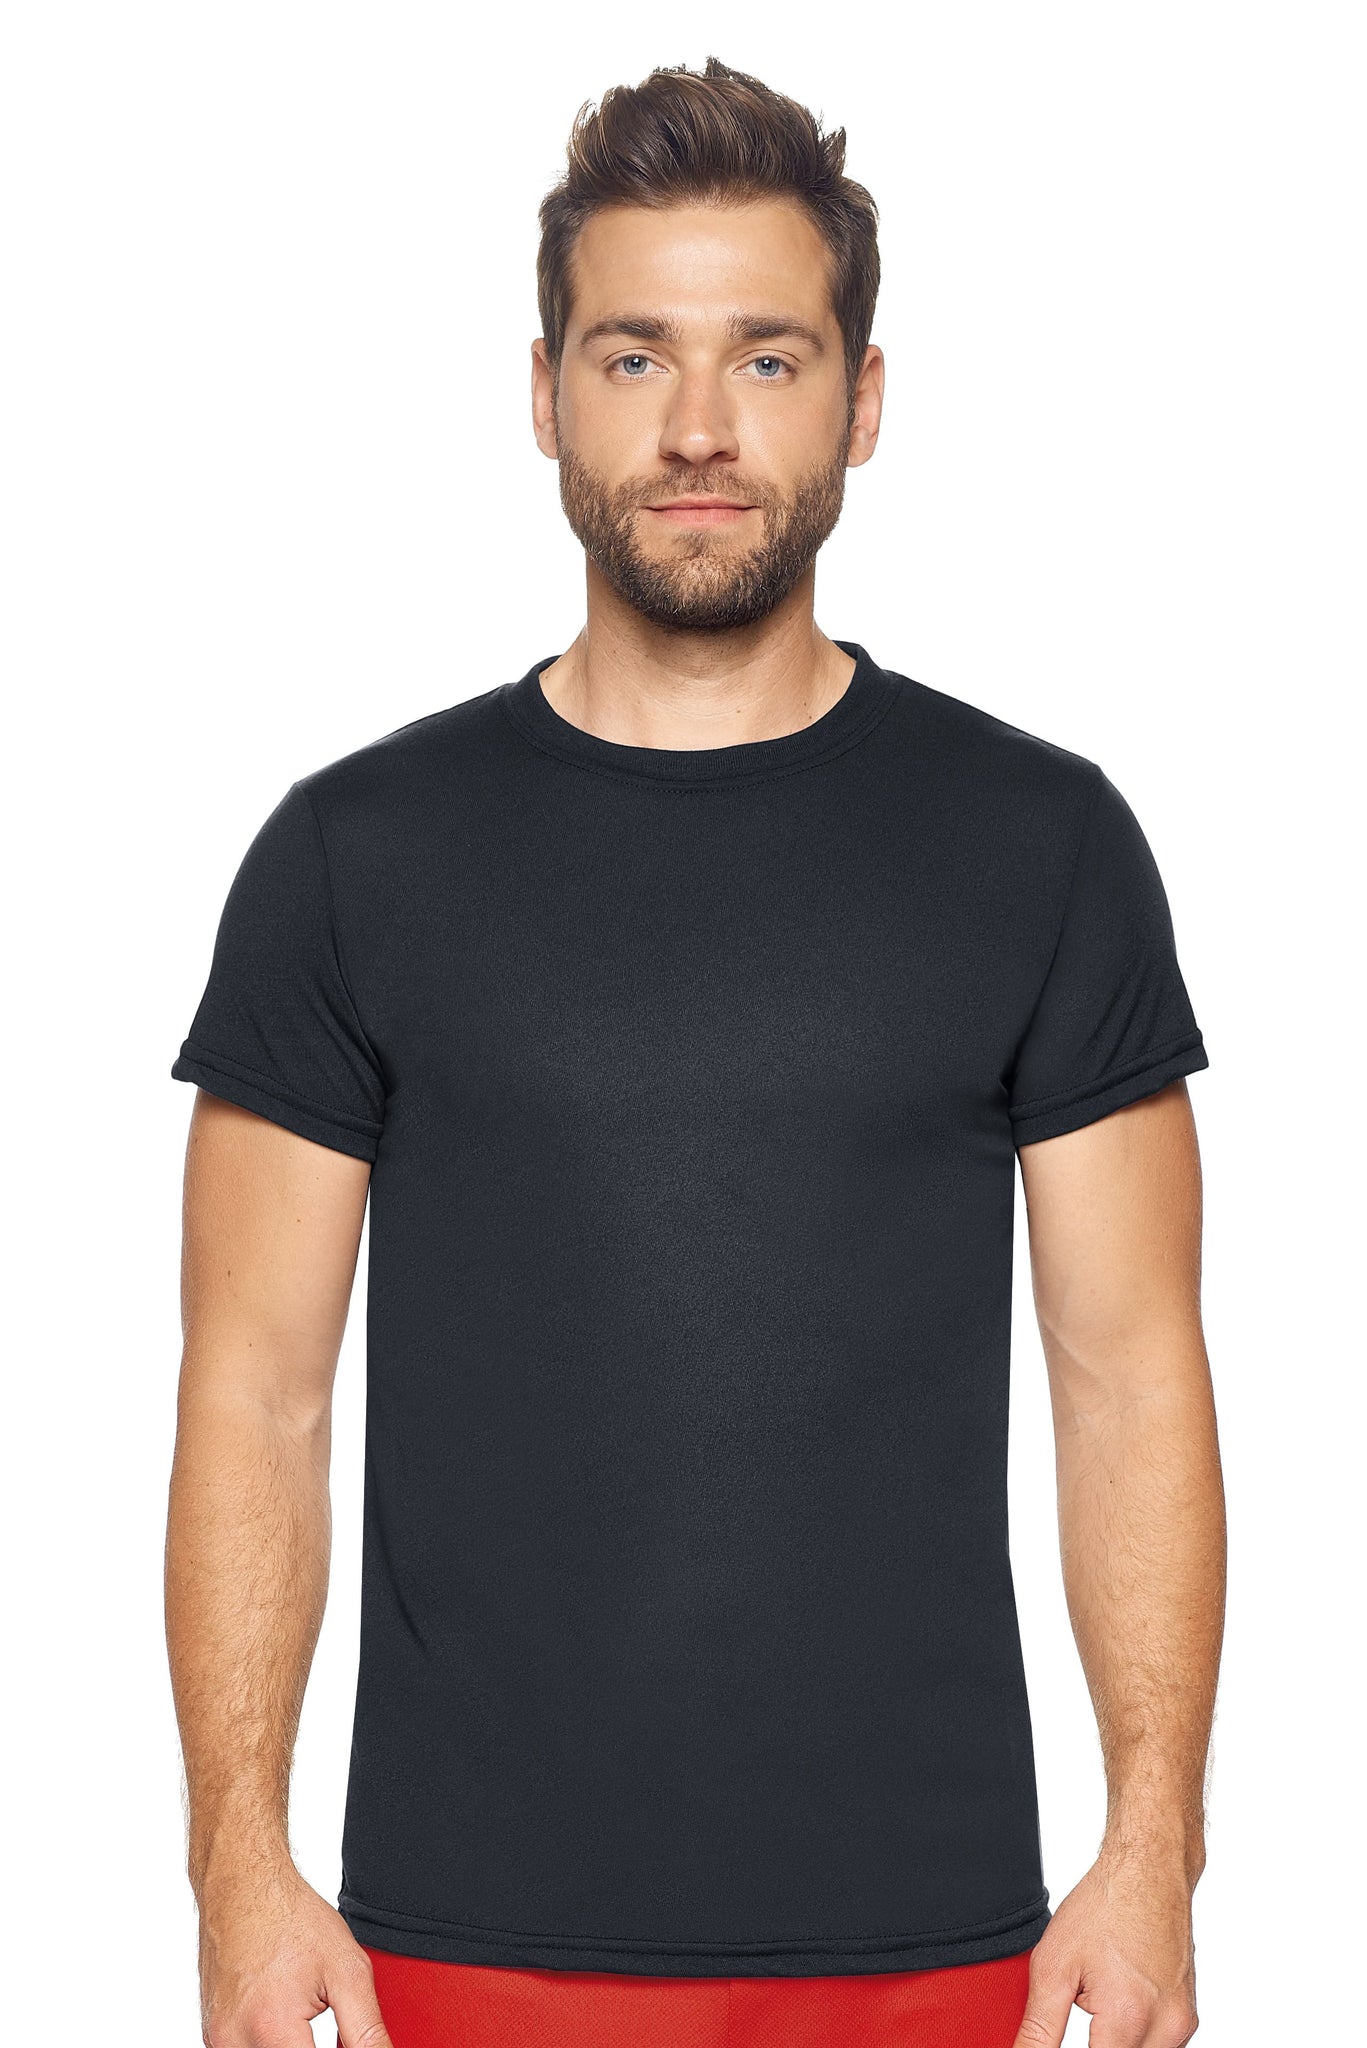 Expert Brand Wholesale Military Physical Training T-Shirt in Black#black